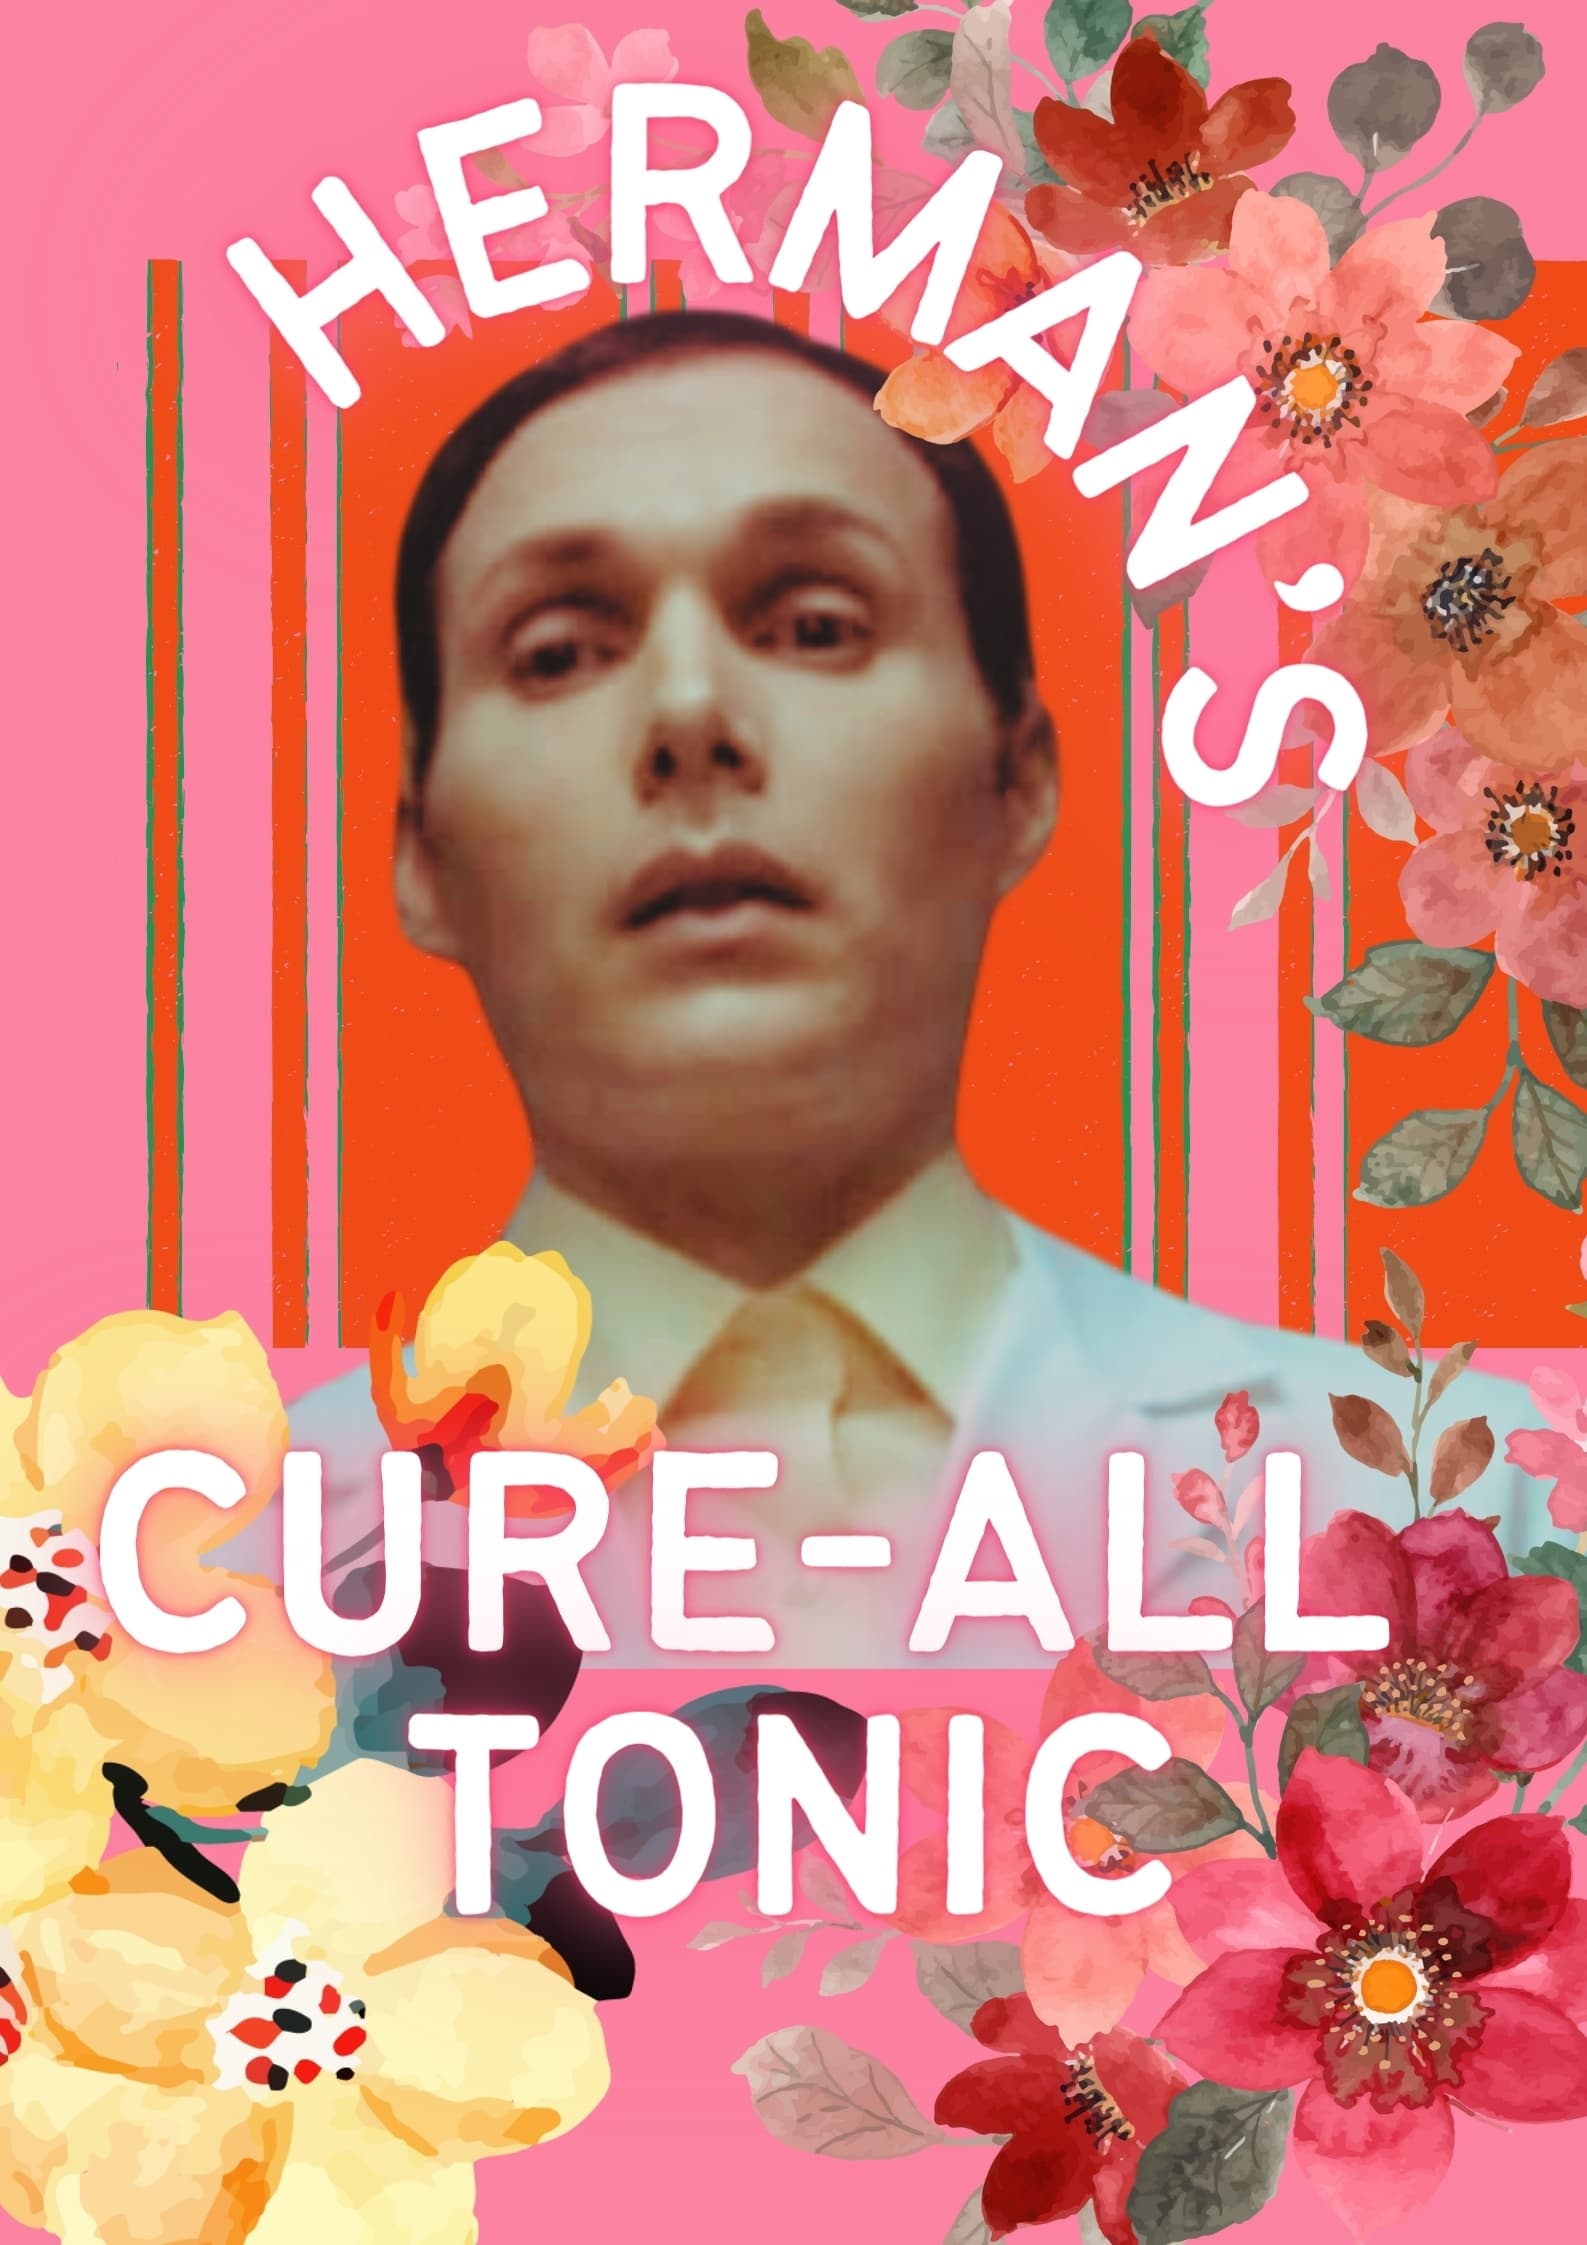 Herman’s Cure-All Tonic